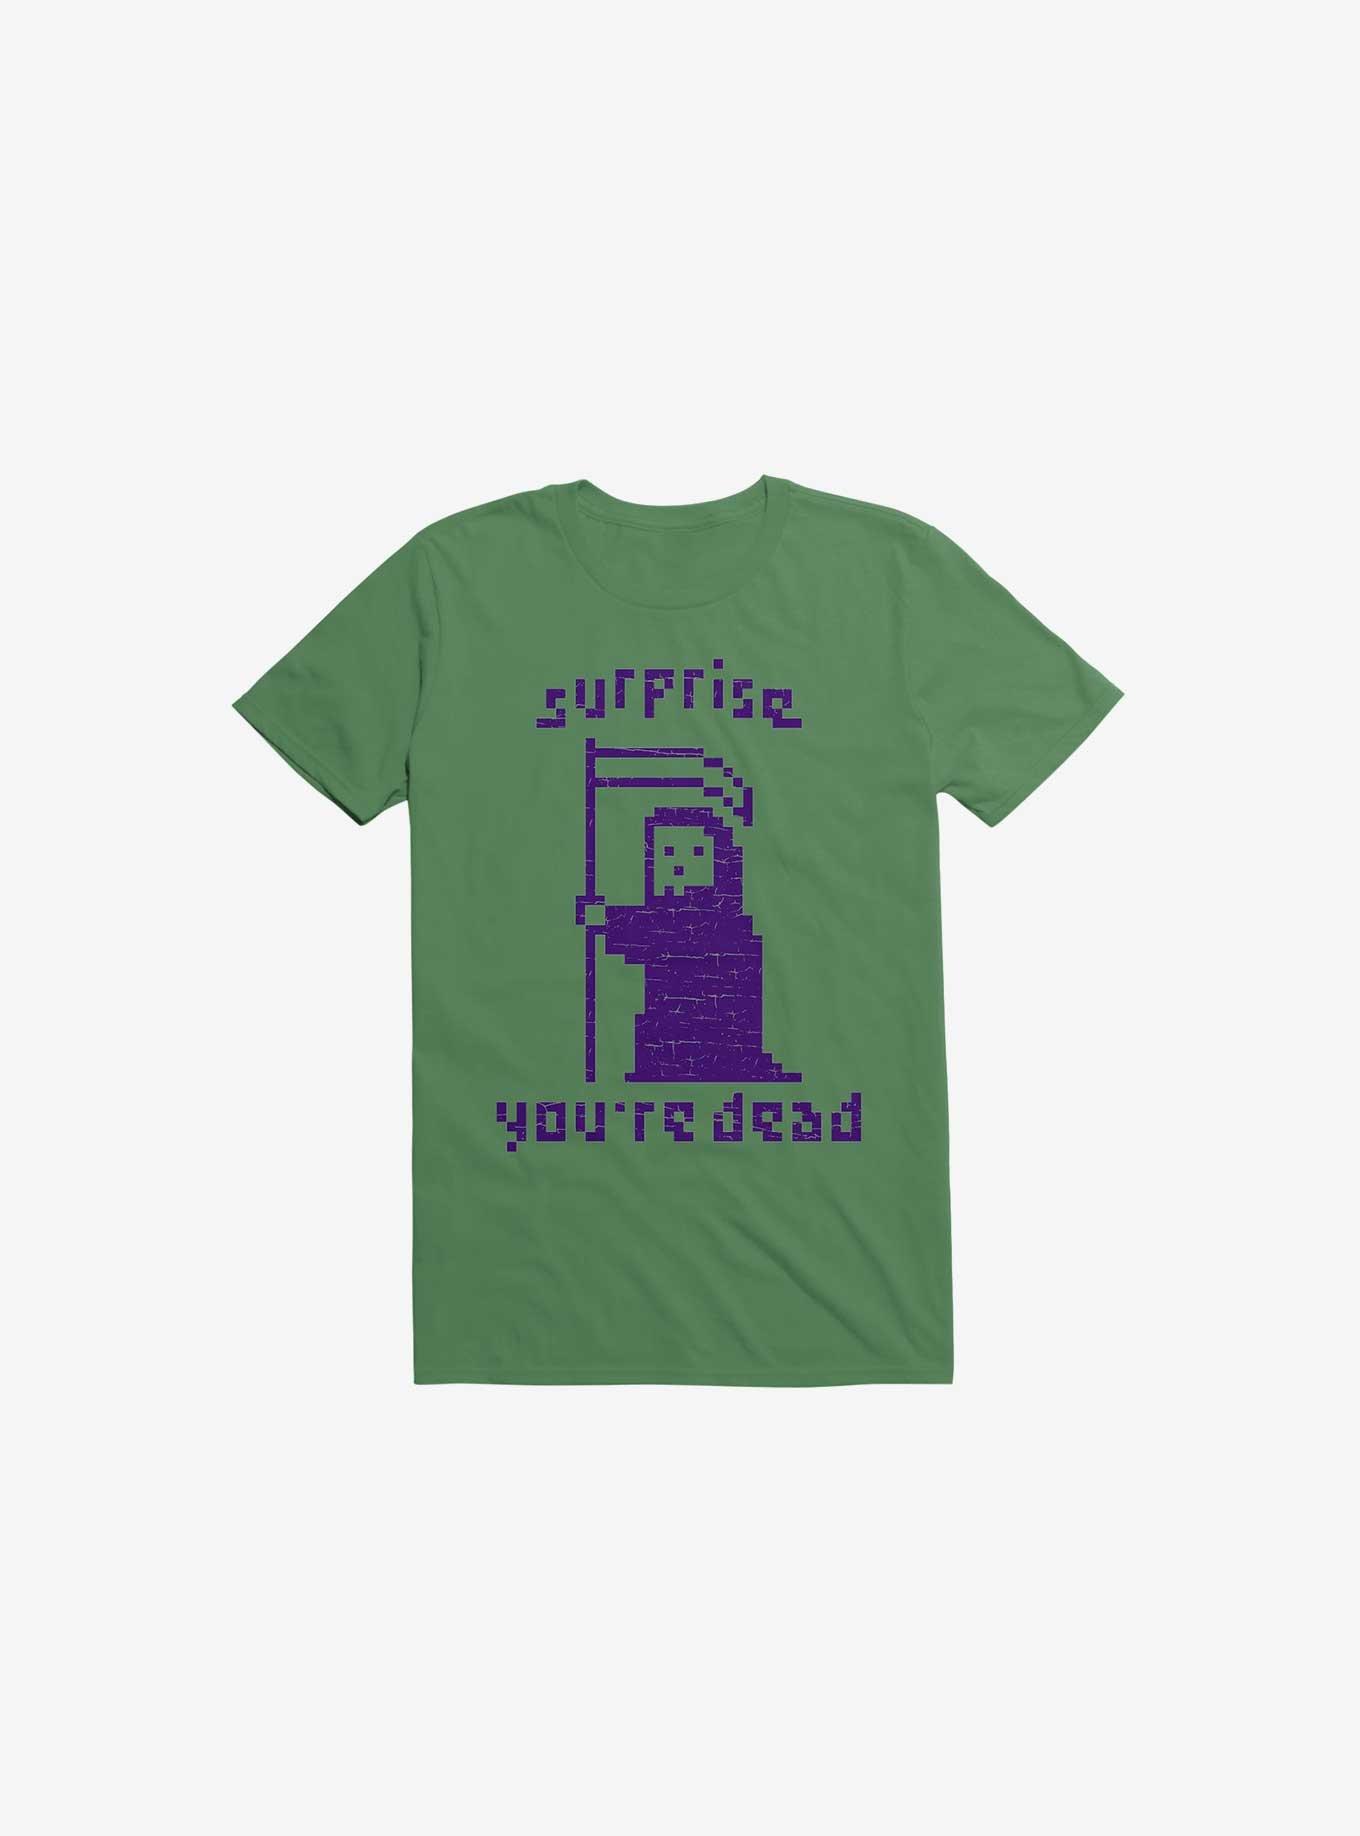 Surprise You're Dead Kelly Green T-Shirt, KELLY GREEN, hi-res